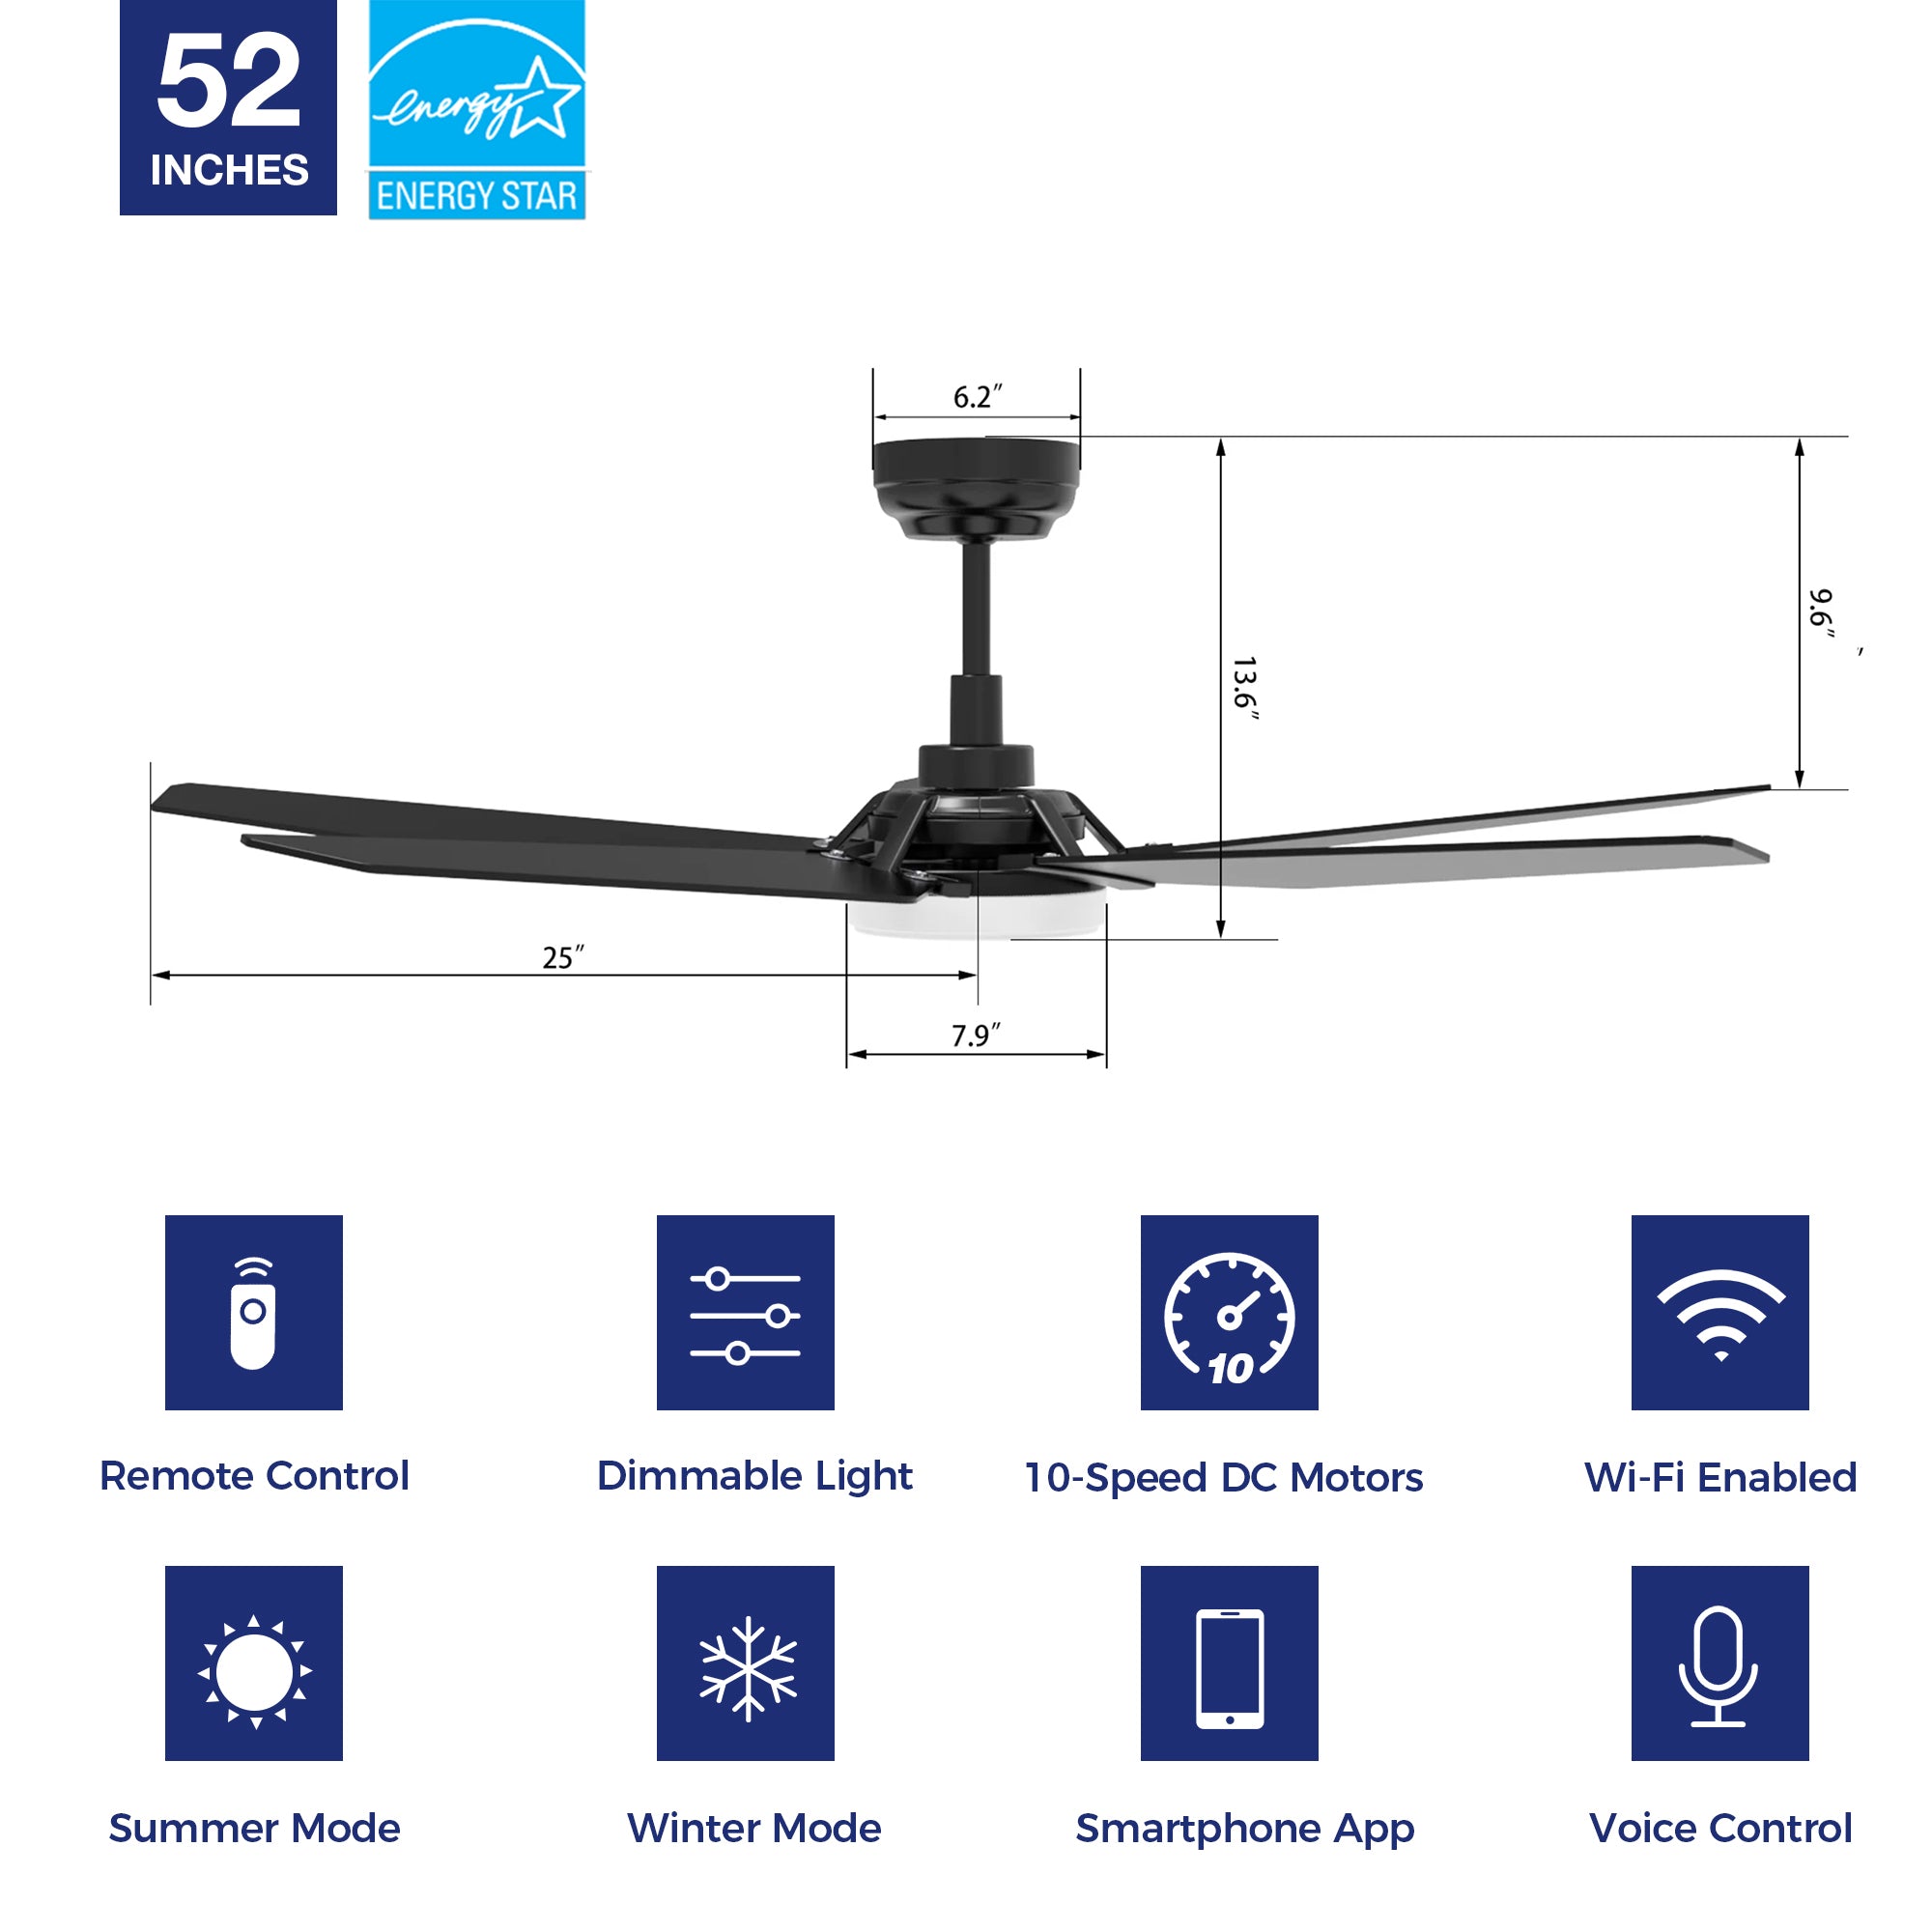 The Smafan Voyager 52&#39;&#39; smart ceiling fan keeps your space cool, bright, and stylish. It is a soft modern masterpiece perfect for your large indoor living spaces. This Wifi smart ceiling fan is a simplicity designing with Black finish, use elegant Plywood blades, Glass shade and has an integrated 4000K LED daylight. The fan features Remote control, Wi-Fi apps, Siri Shortcut and Voice control technology (compatible with Amazon Alexa and Google Home Assistant ) to set fan preferences.